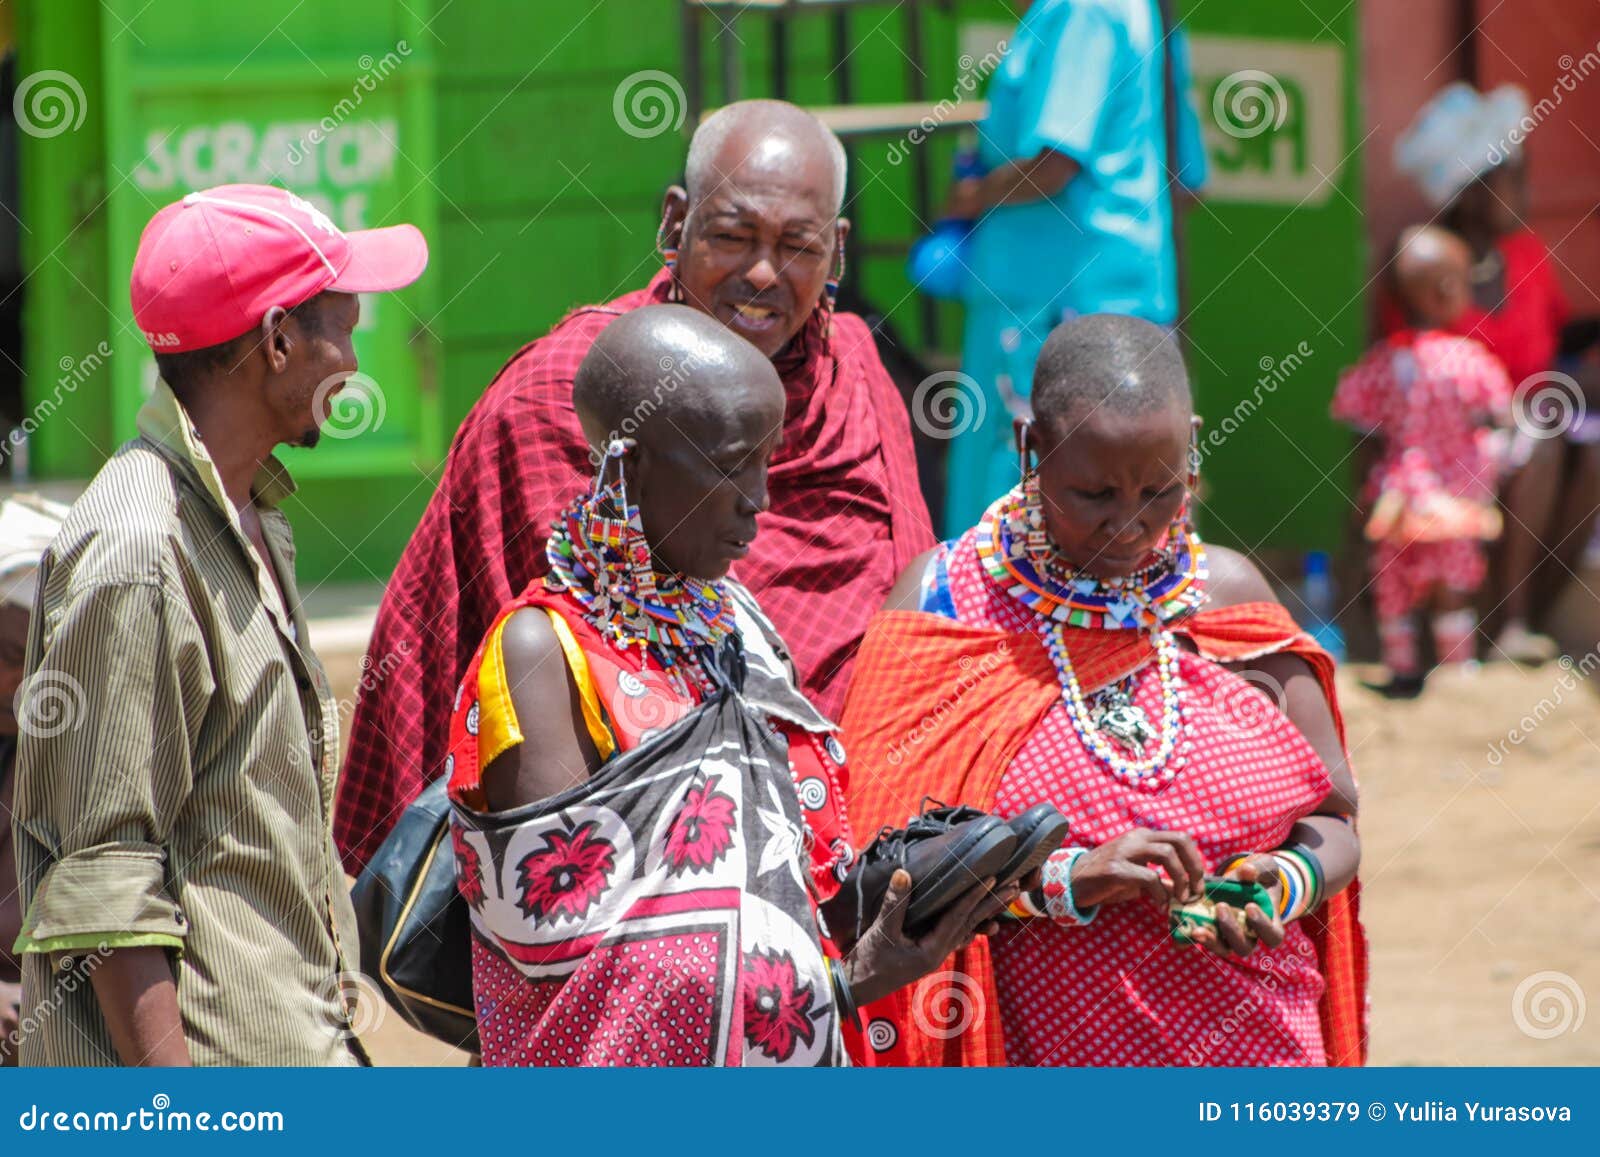 Masai Tribe Traditional Dressed People in African Street Market ...